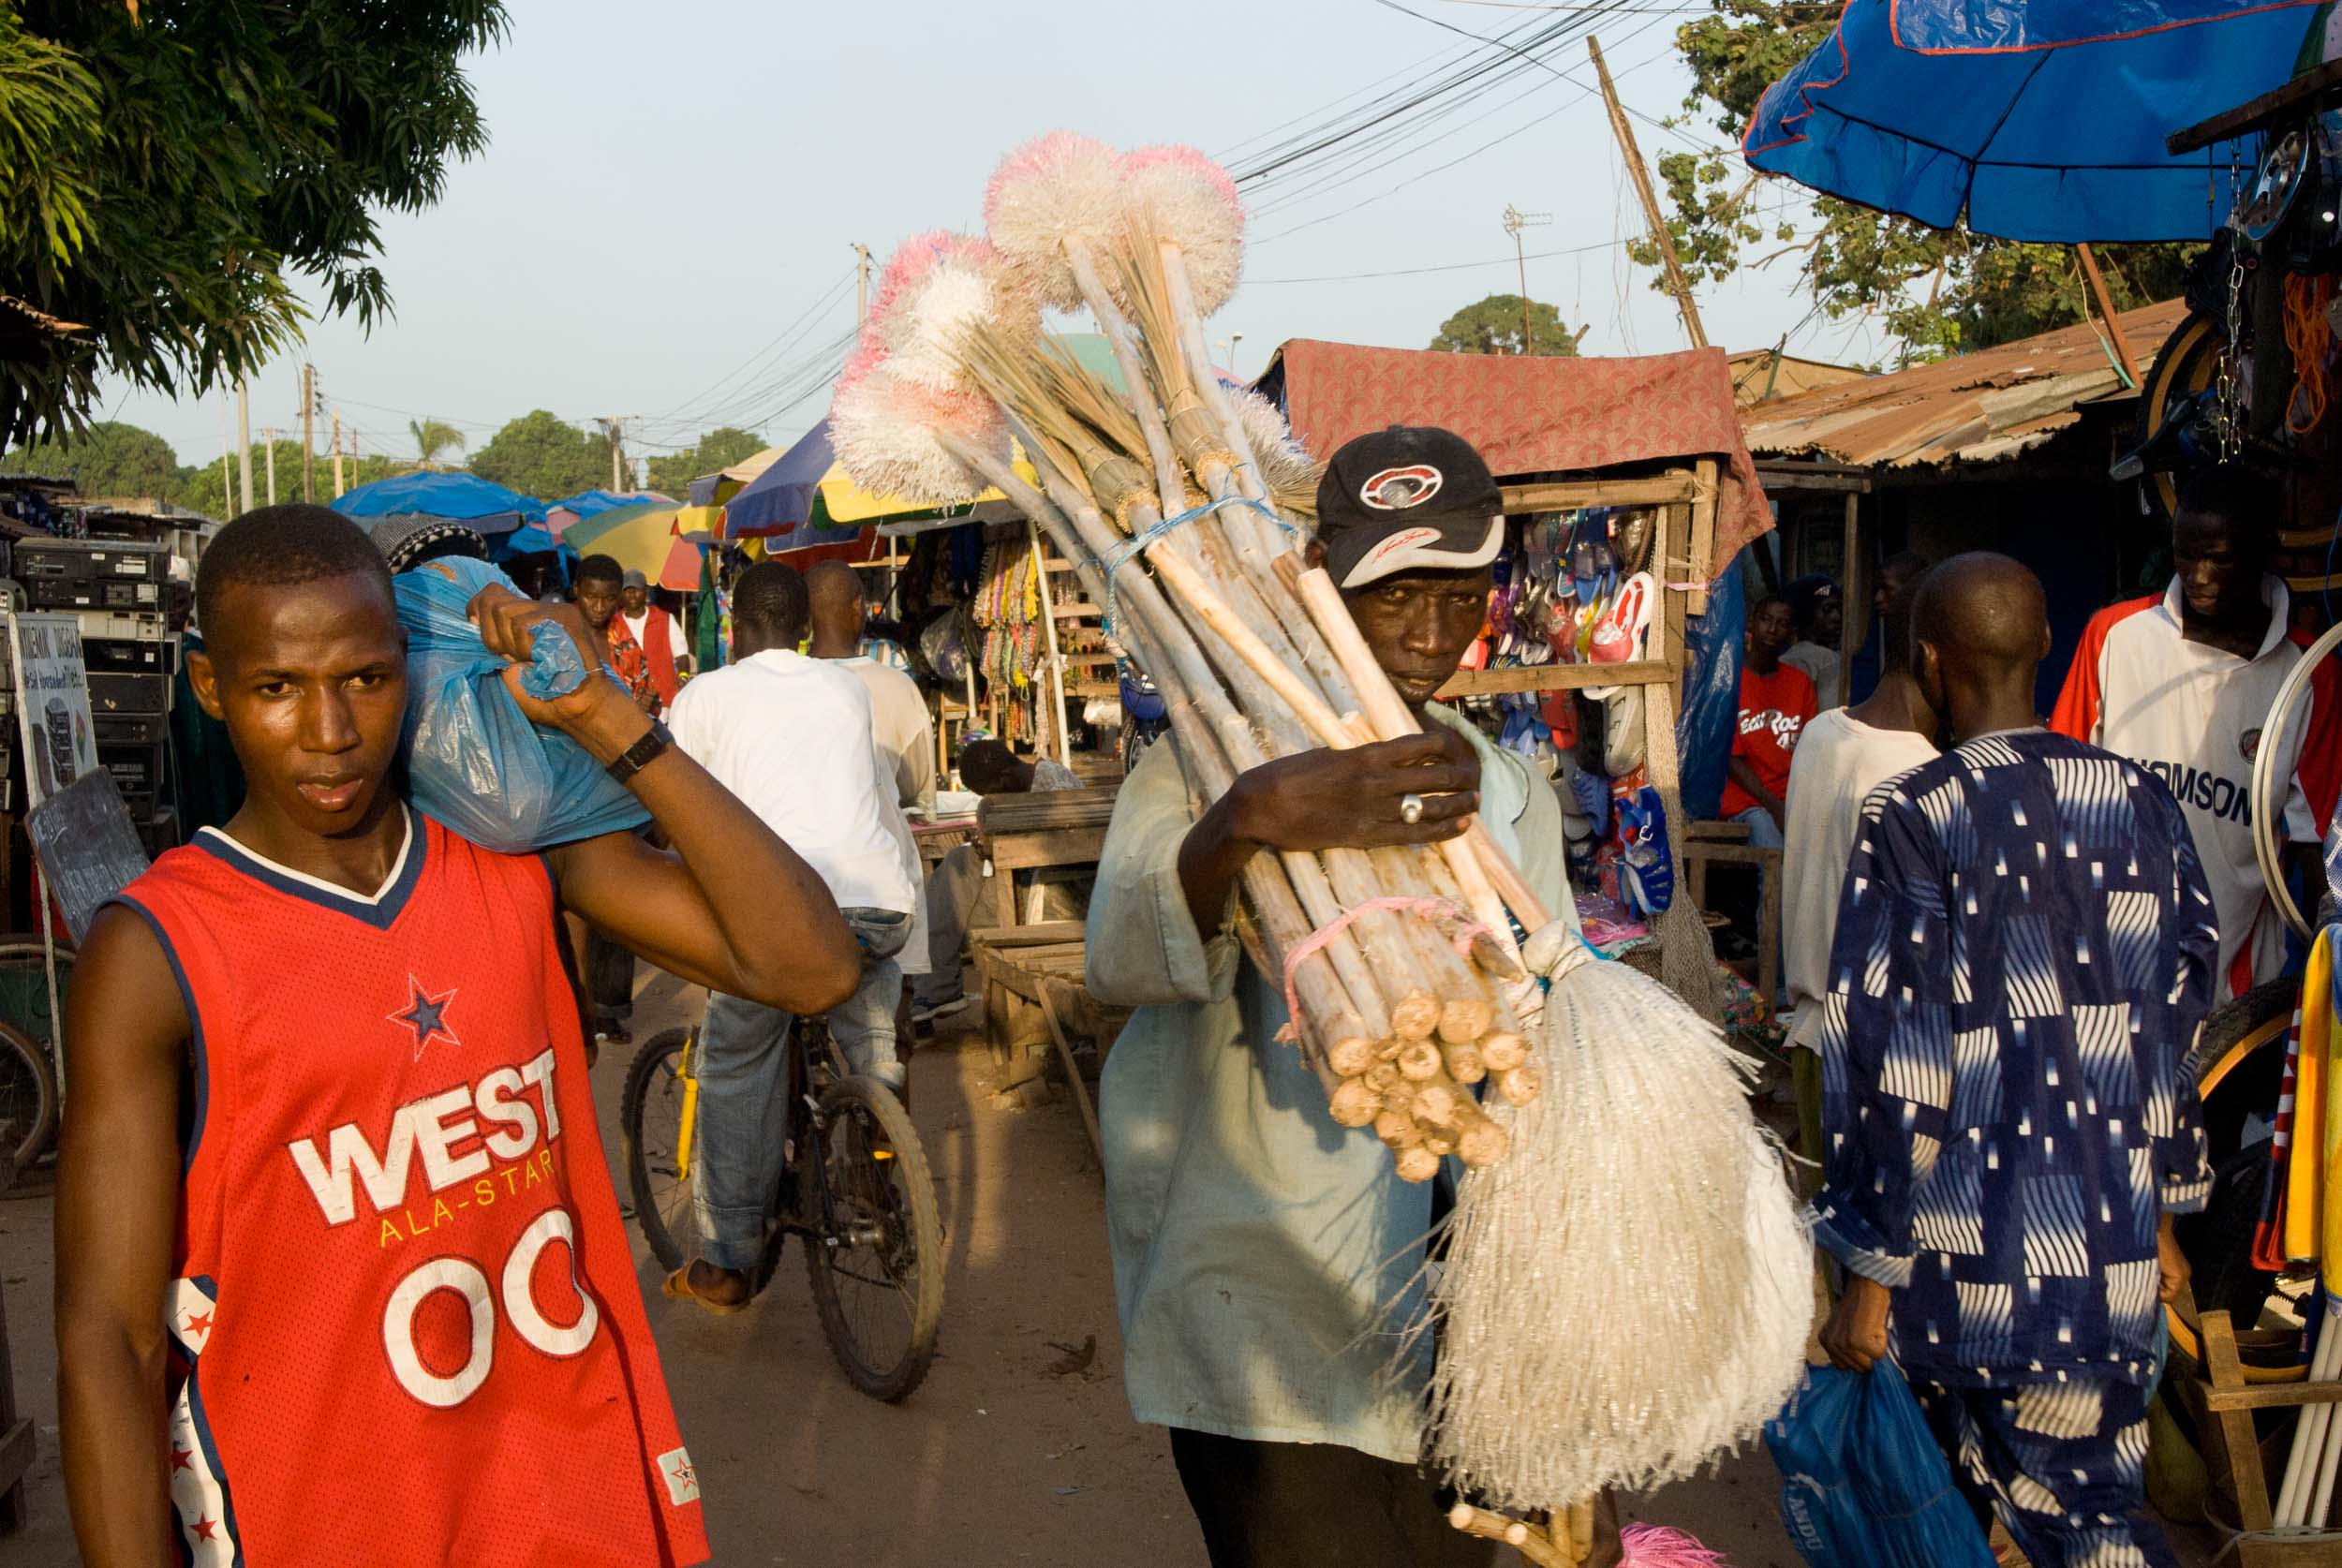  Carrying Brooms, Open Air Market, Gambia, Africa 